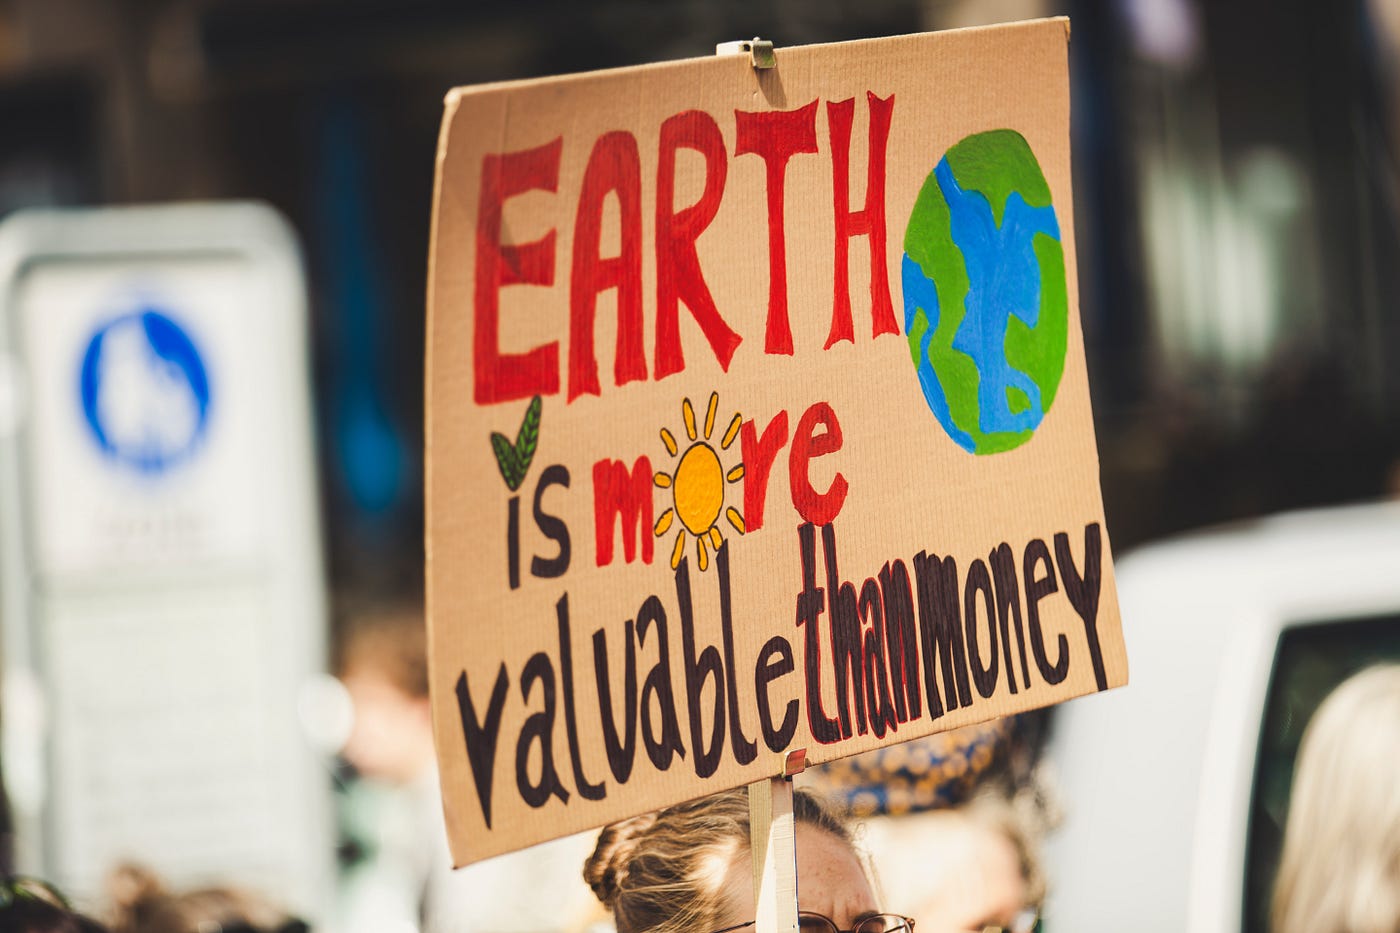 A sign that claims “Earth is more valuable than money”